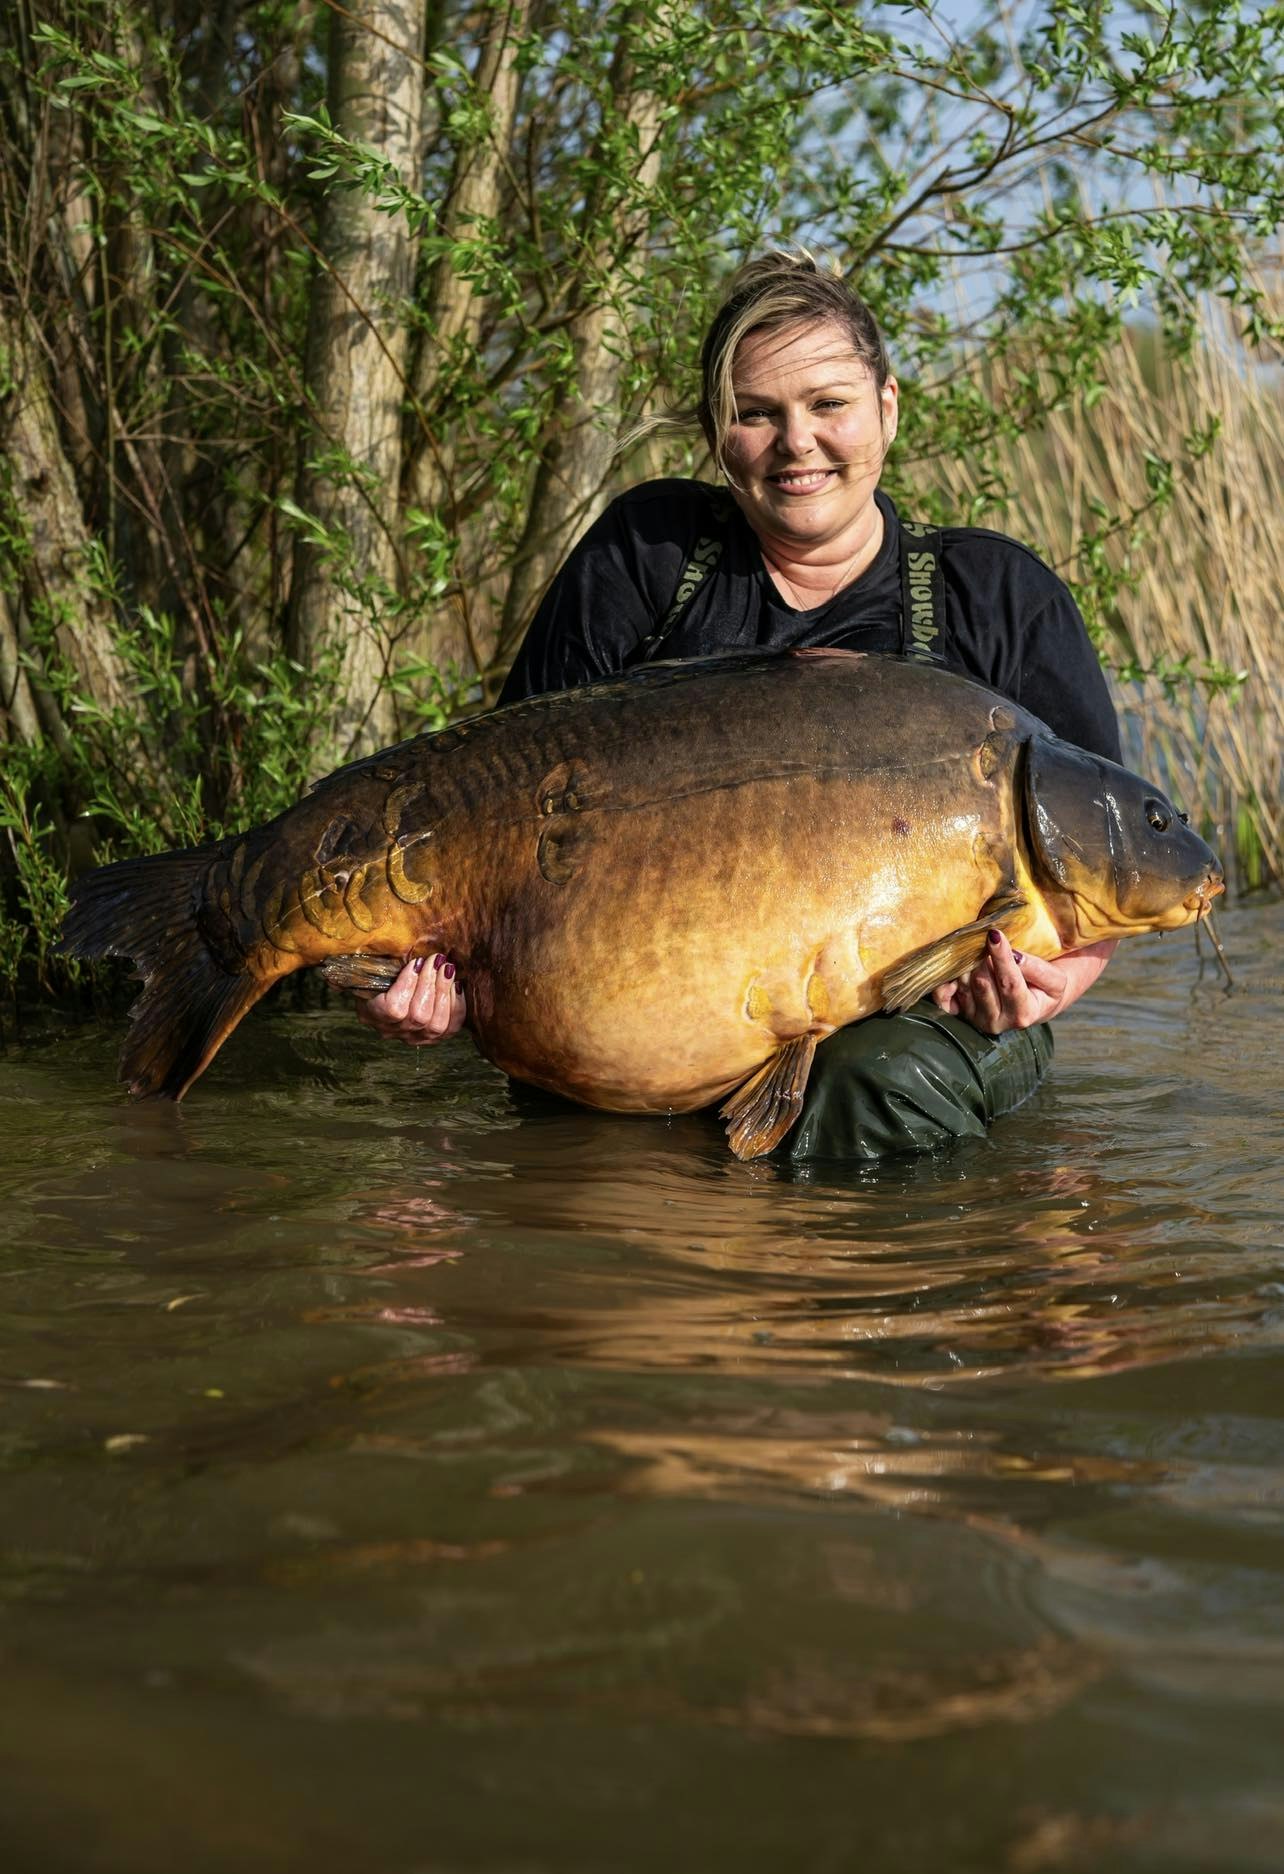 The elation says it all, Naomi with her PB carp at 72lb 12oz.